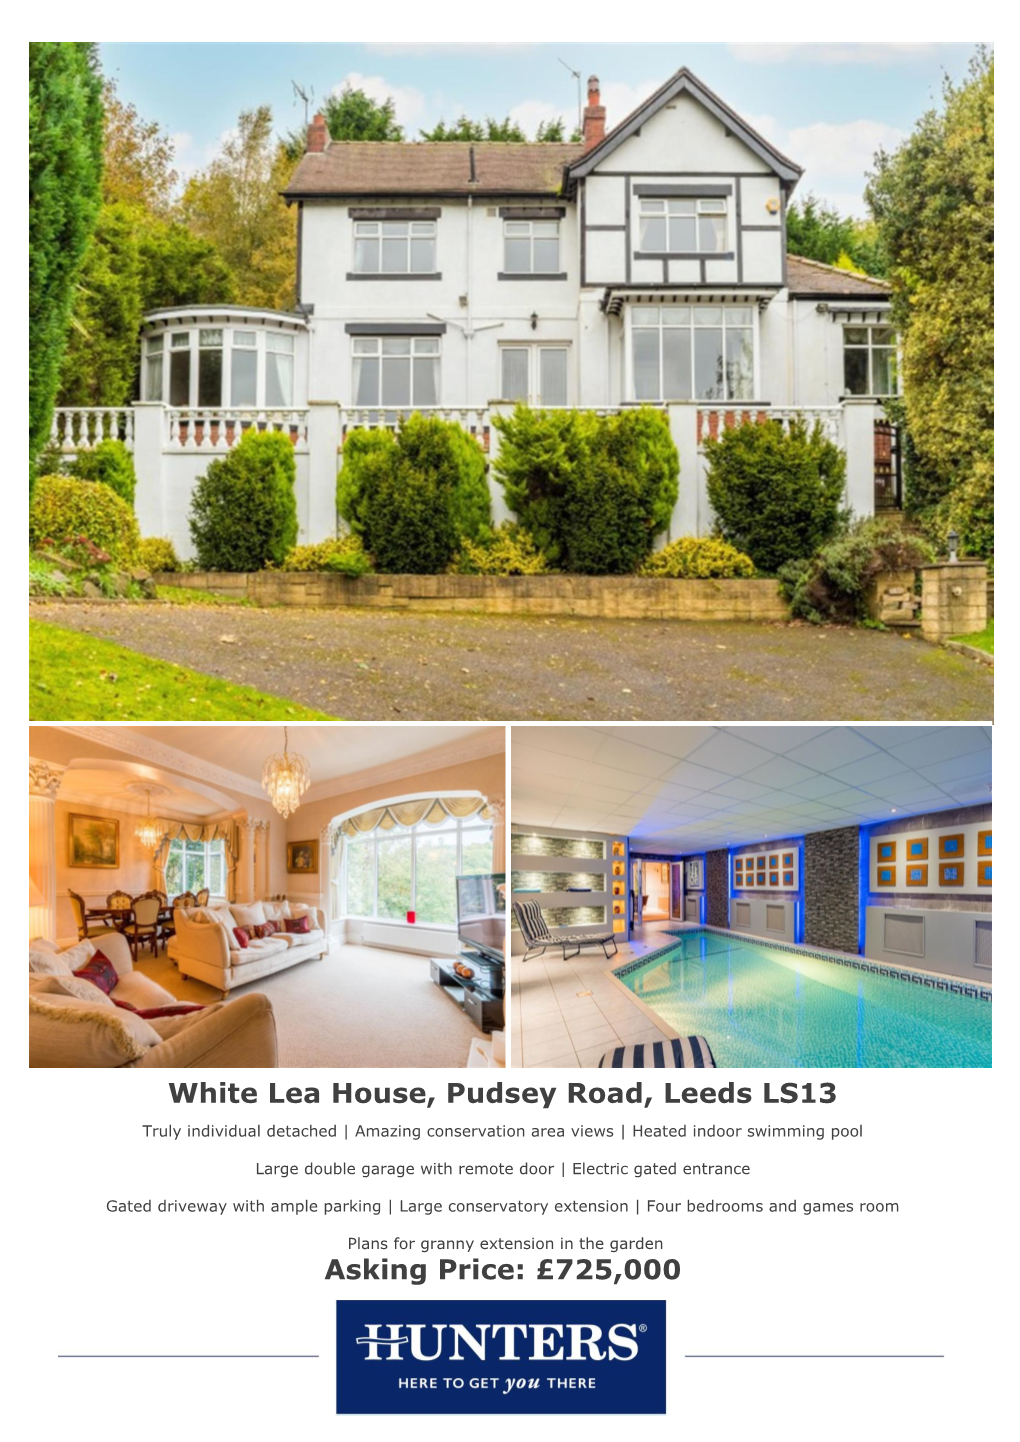 White Lea House, Pudsey Road, Leeds LS13 Asking Price